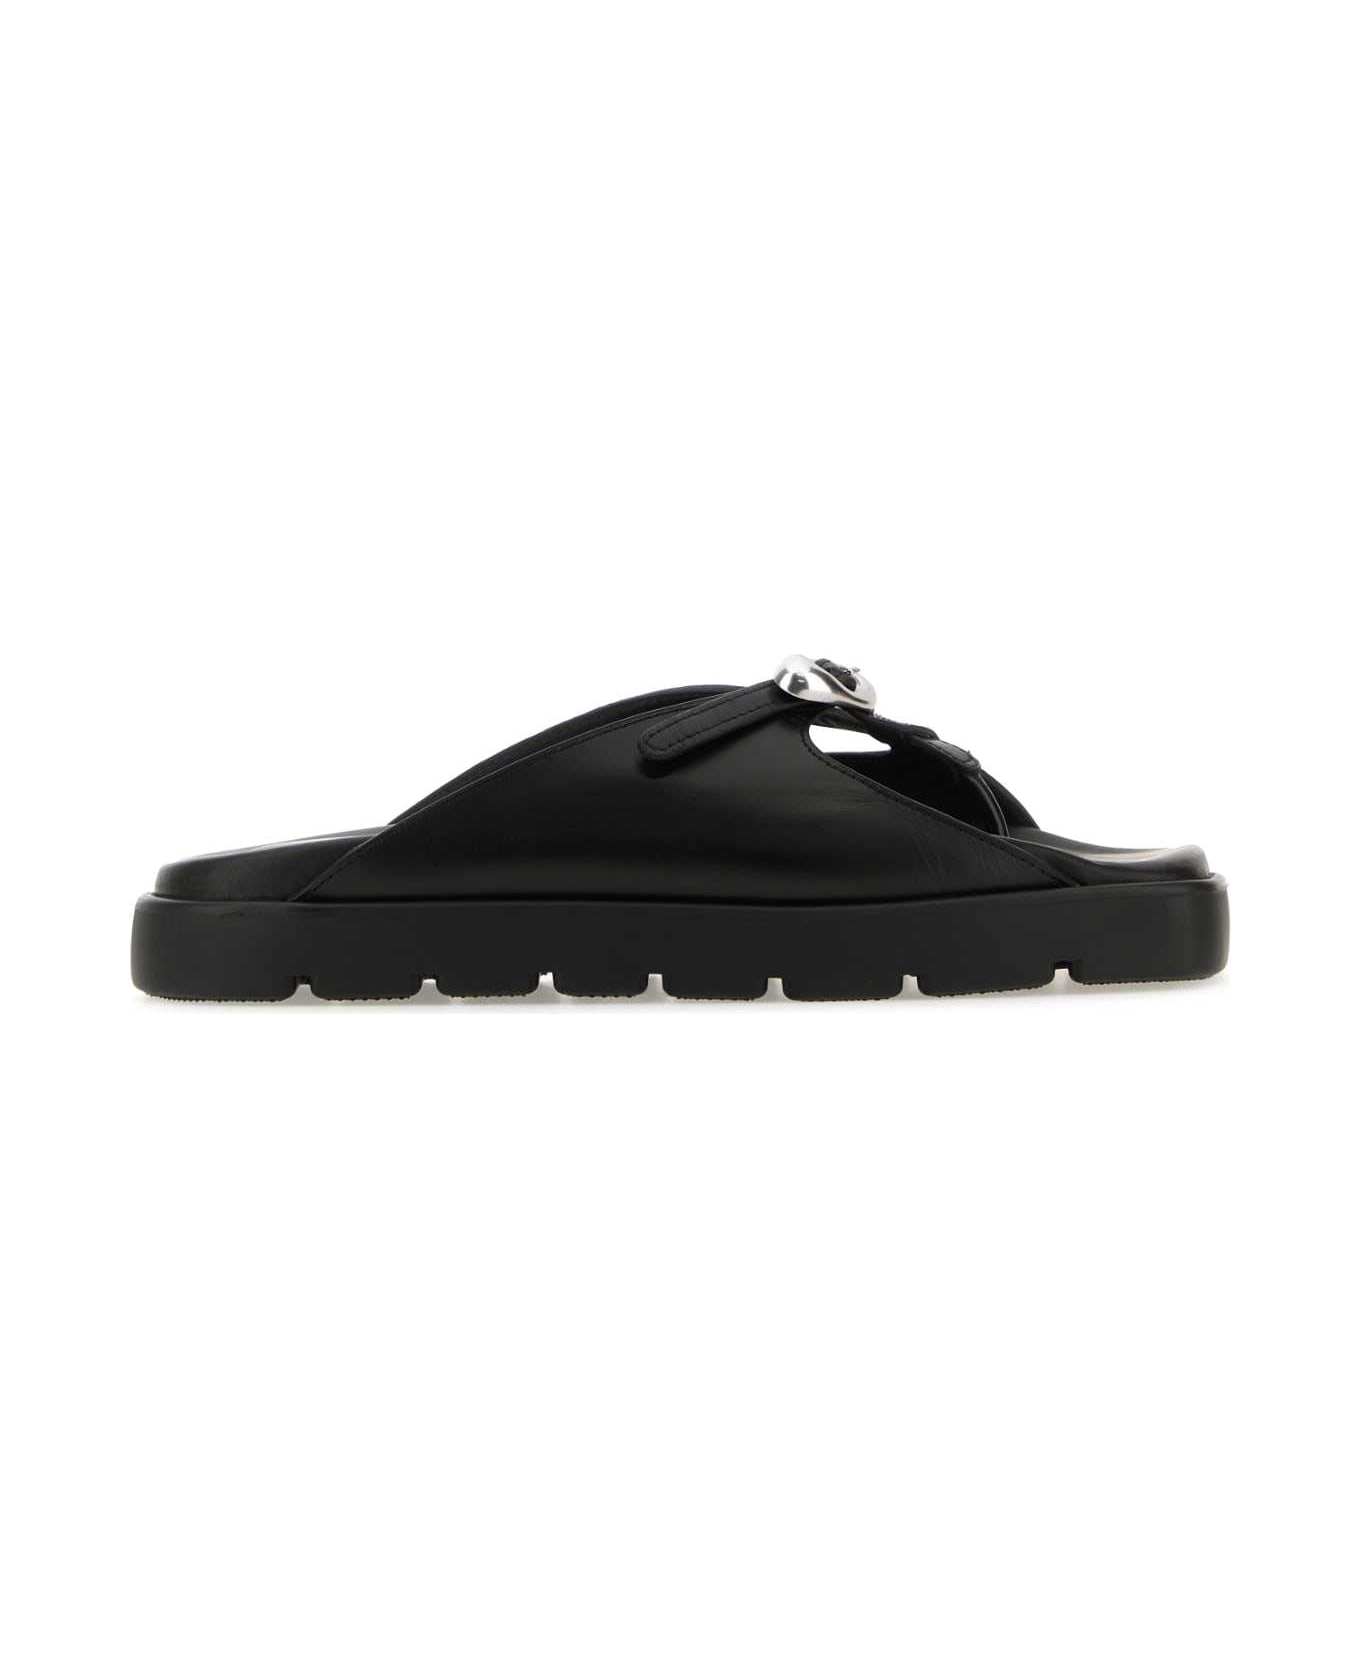 Alexander Wang Black Leather Dome Thong Slippers - BLACK